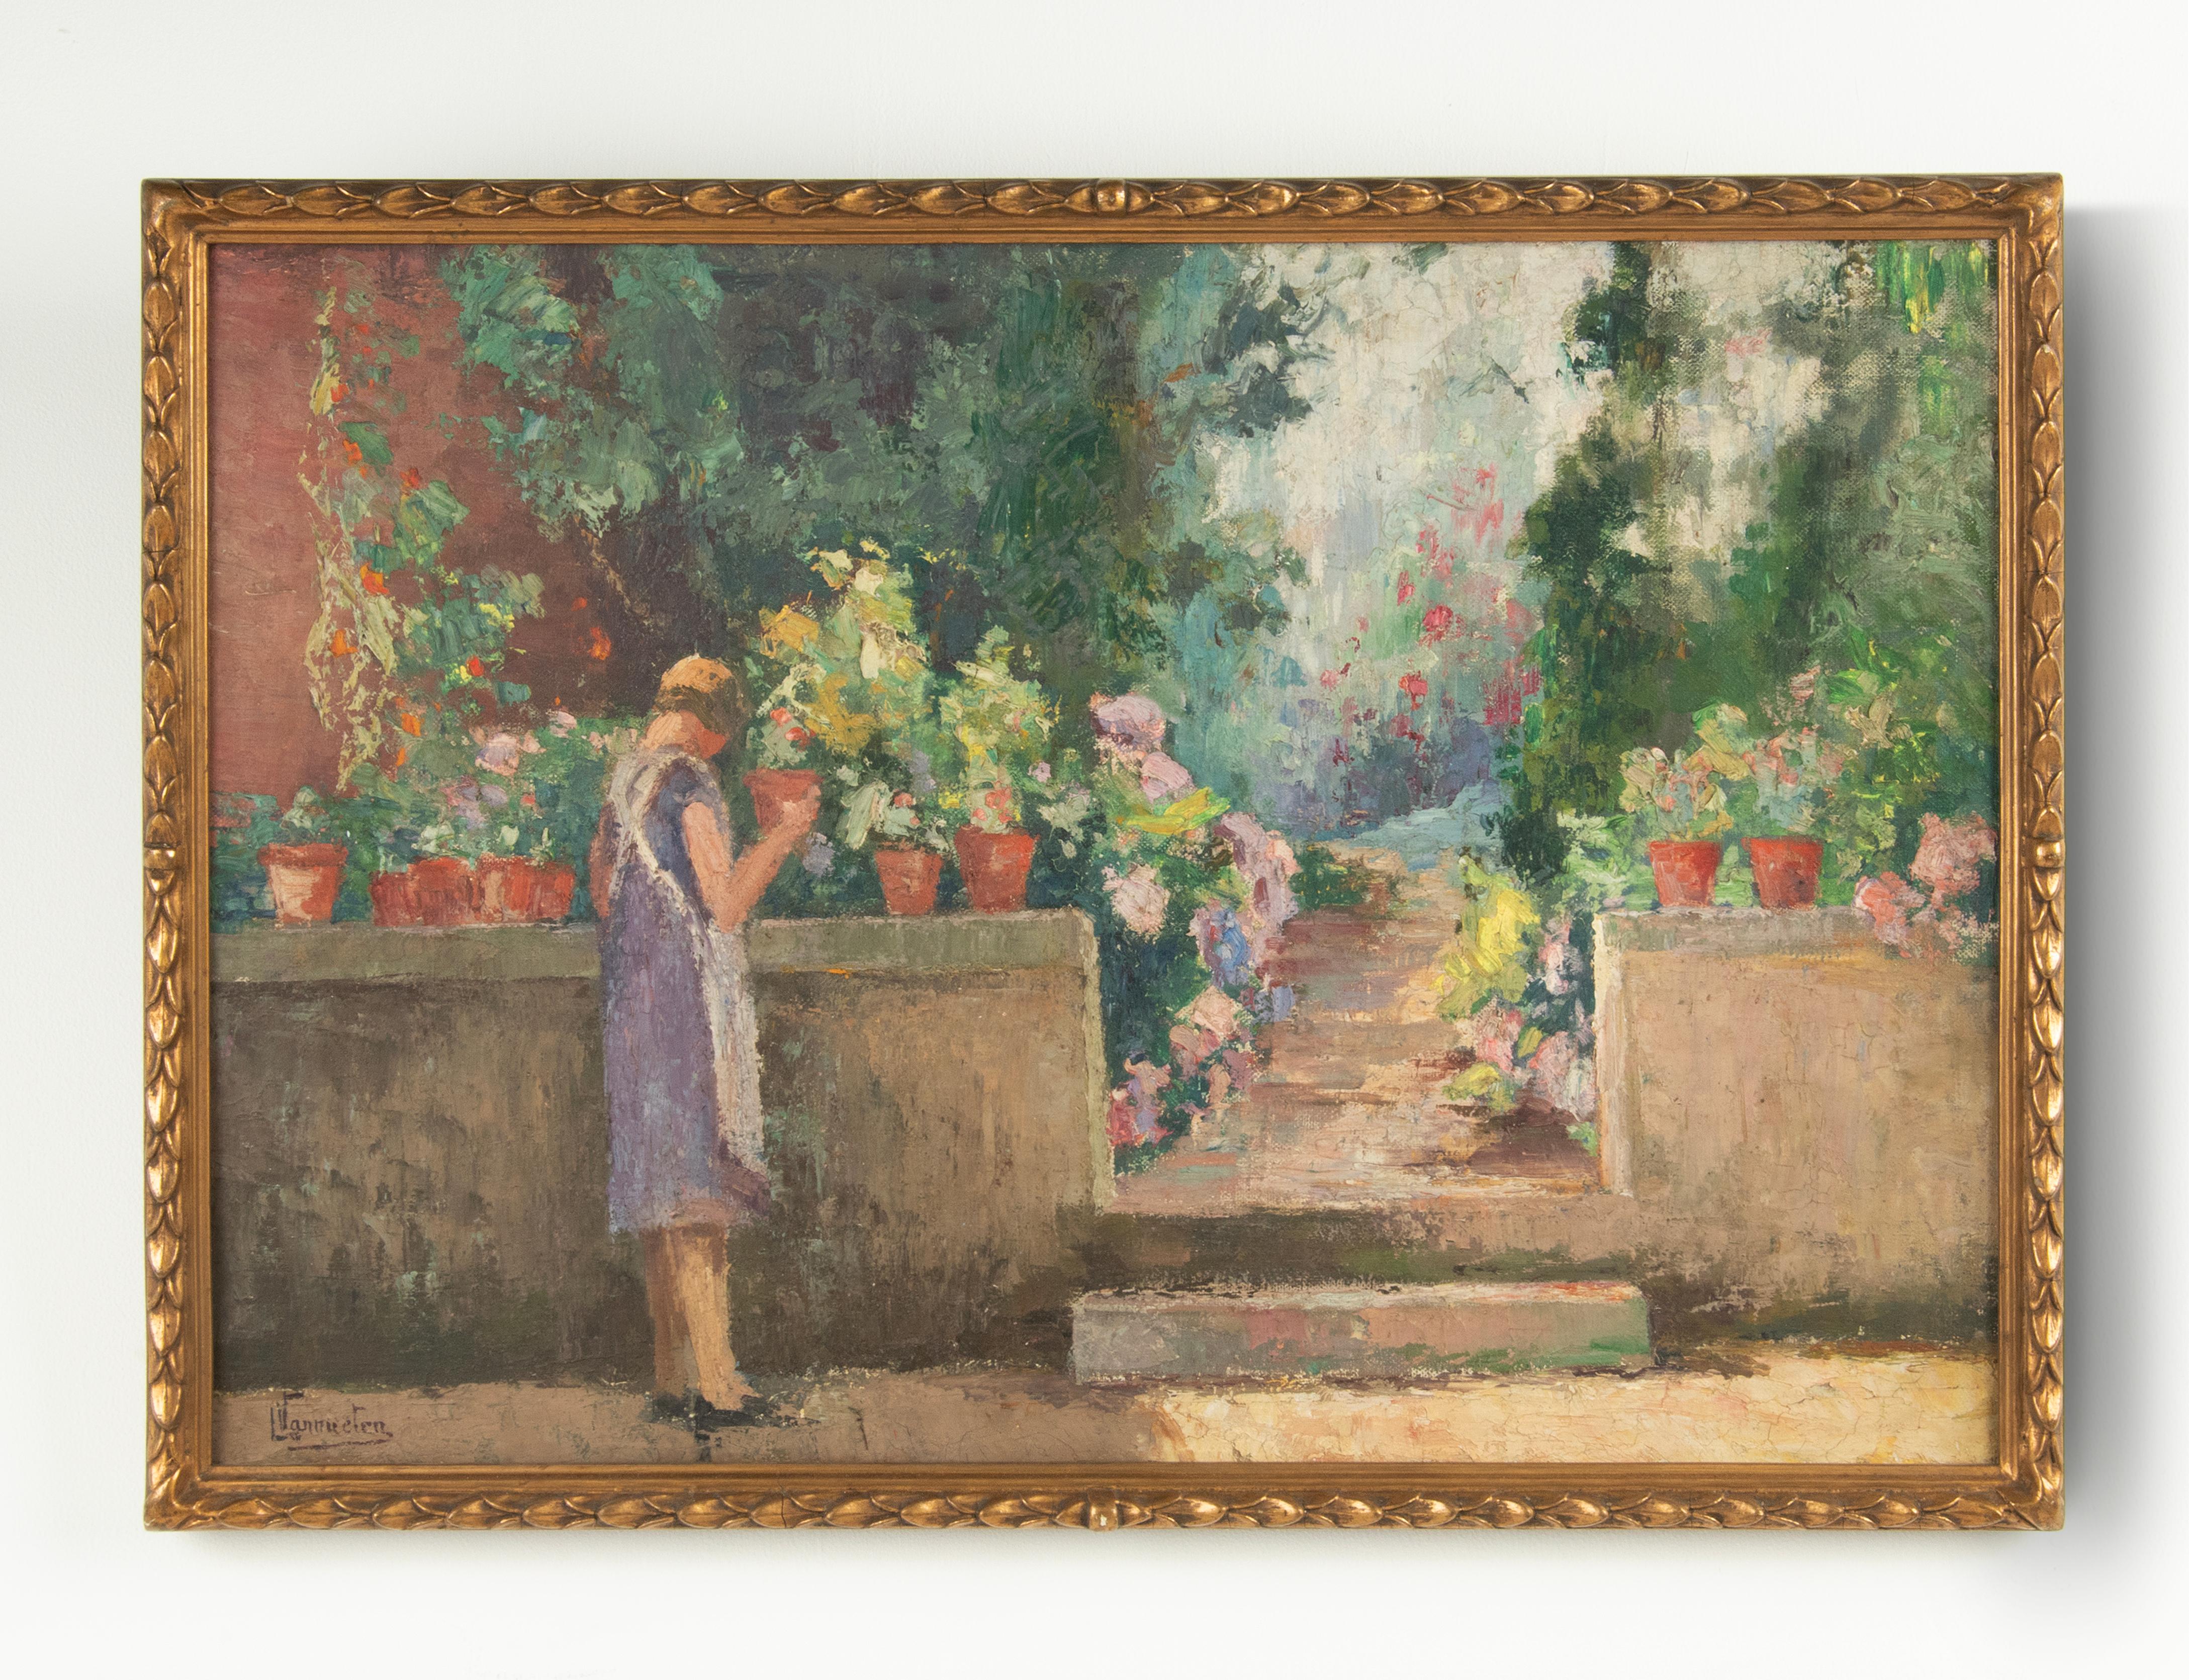 An antique oil painting on canvas. Signed lower left: Leon Vannueten. Depicted a woman who is gardening. A beautiful everyday scene captured on canvas.

Dimension frame: 58 x 41 cm
Dimension painting: 37,5 x 45 cm

Leon Vannuetten. Belgium,